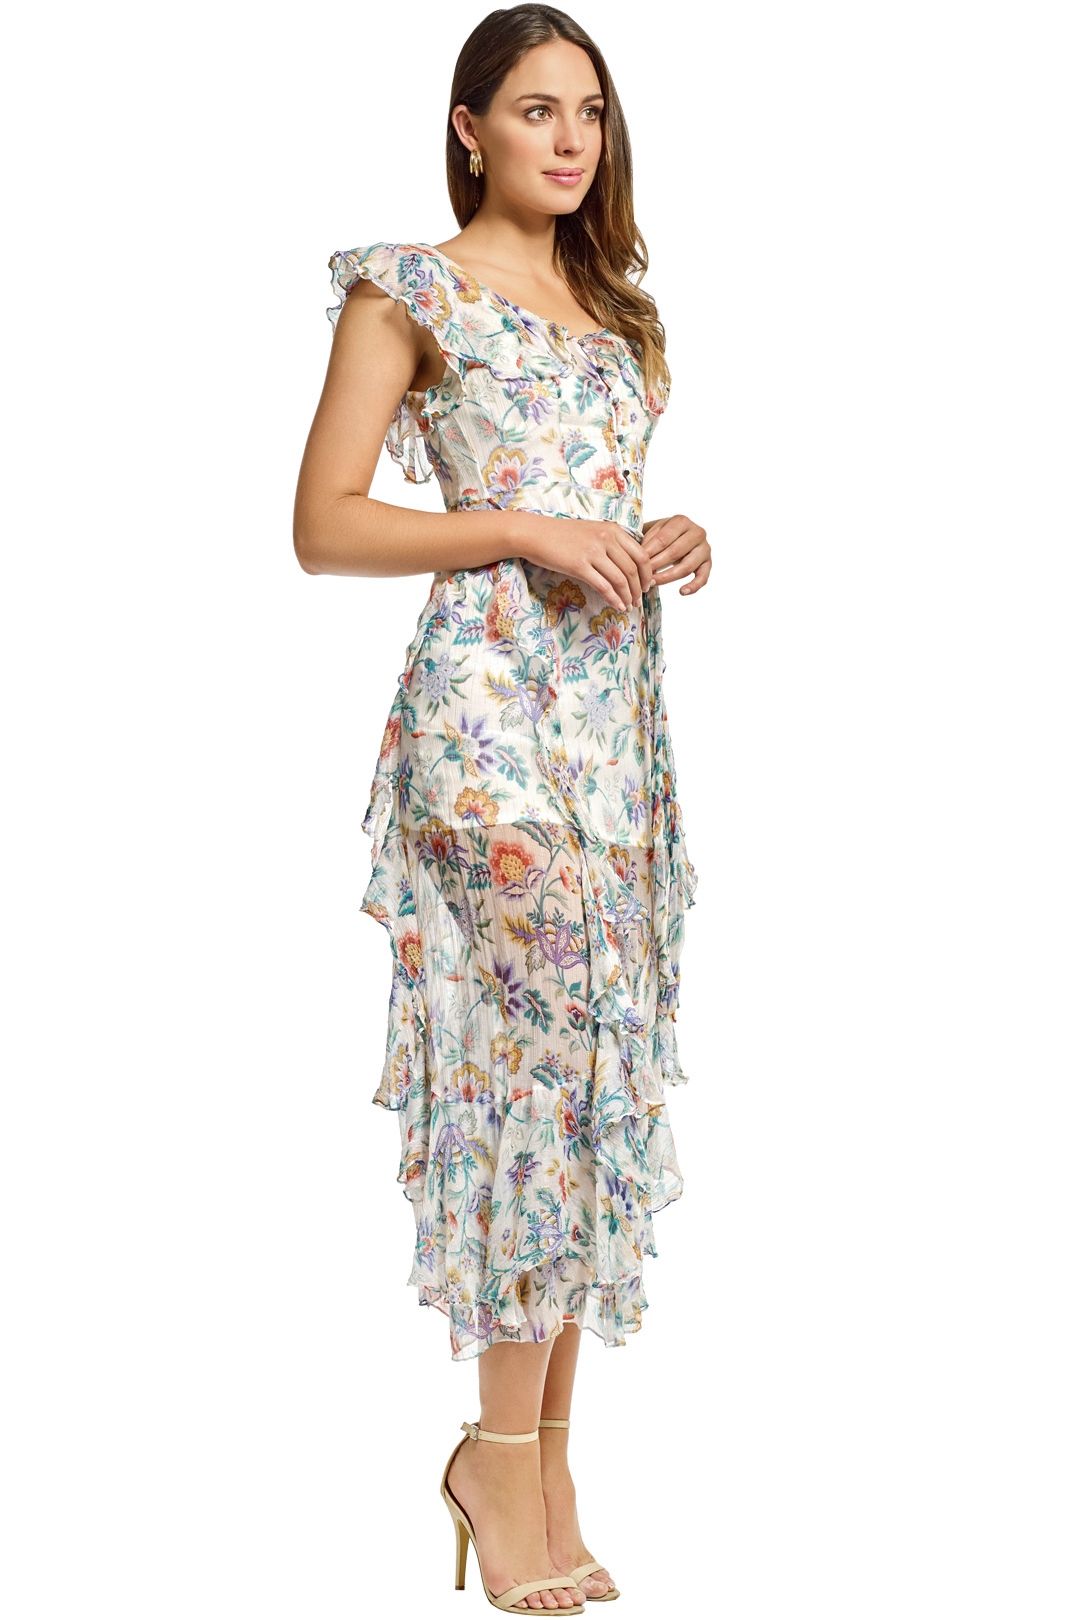 Alice McCall - Oh Oh Oh Maxi Dress - Ivory Garden - Side